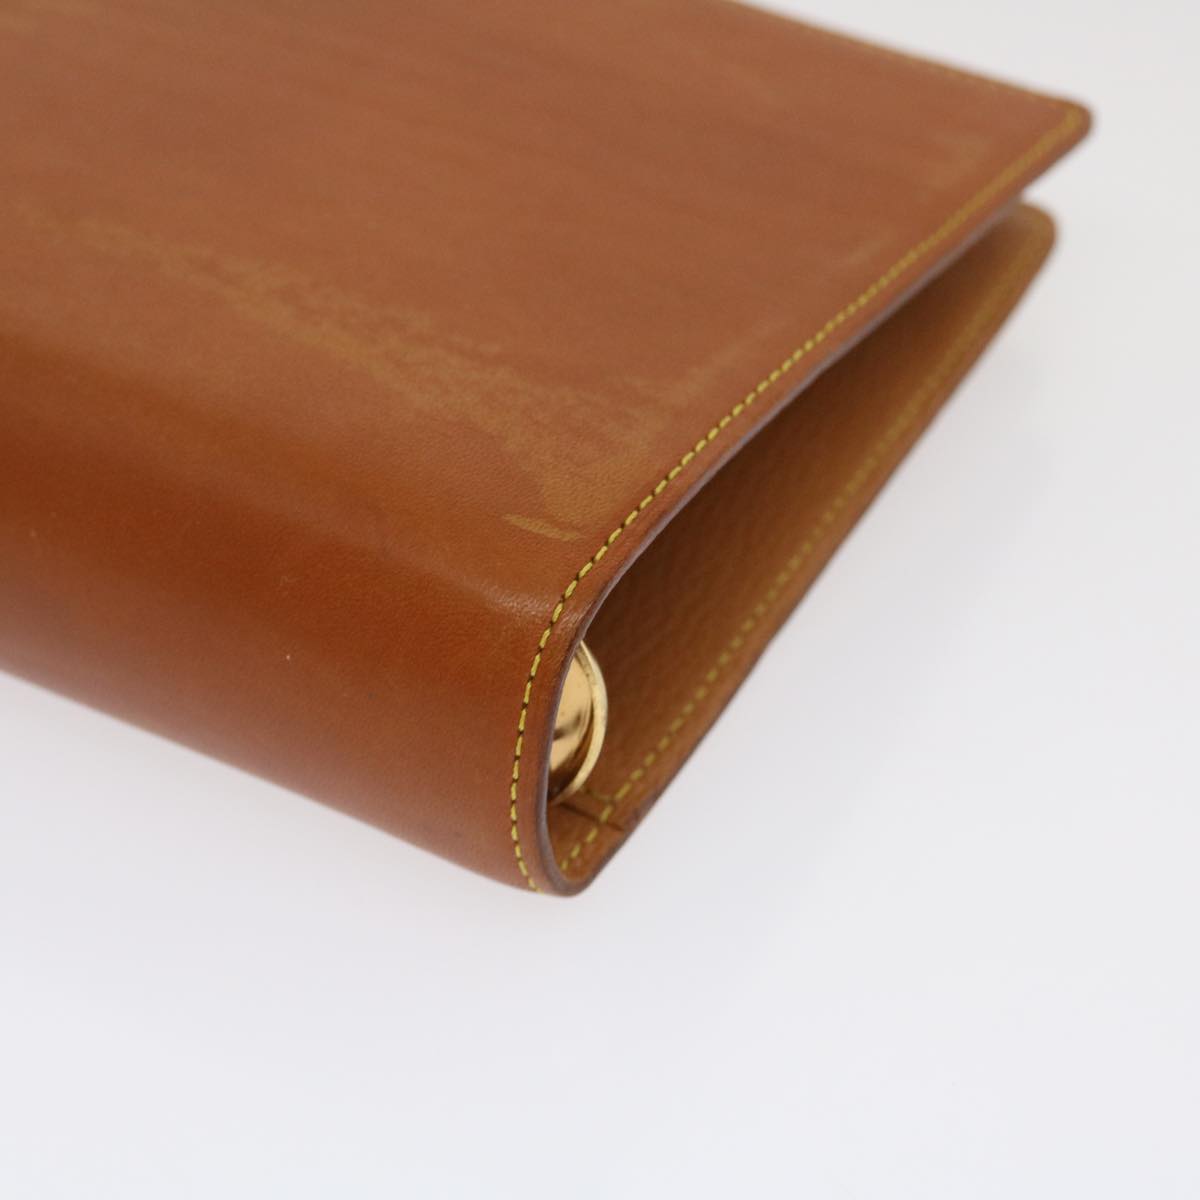 LOUIS VUITTON Nomad Agenda MM Day Planner Cover Brown R20105 LV Auth 29827